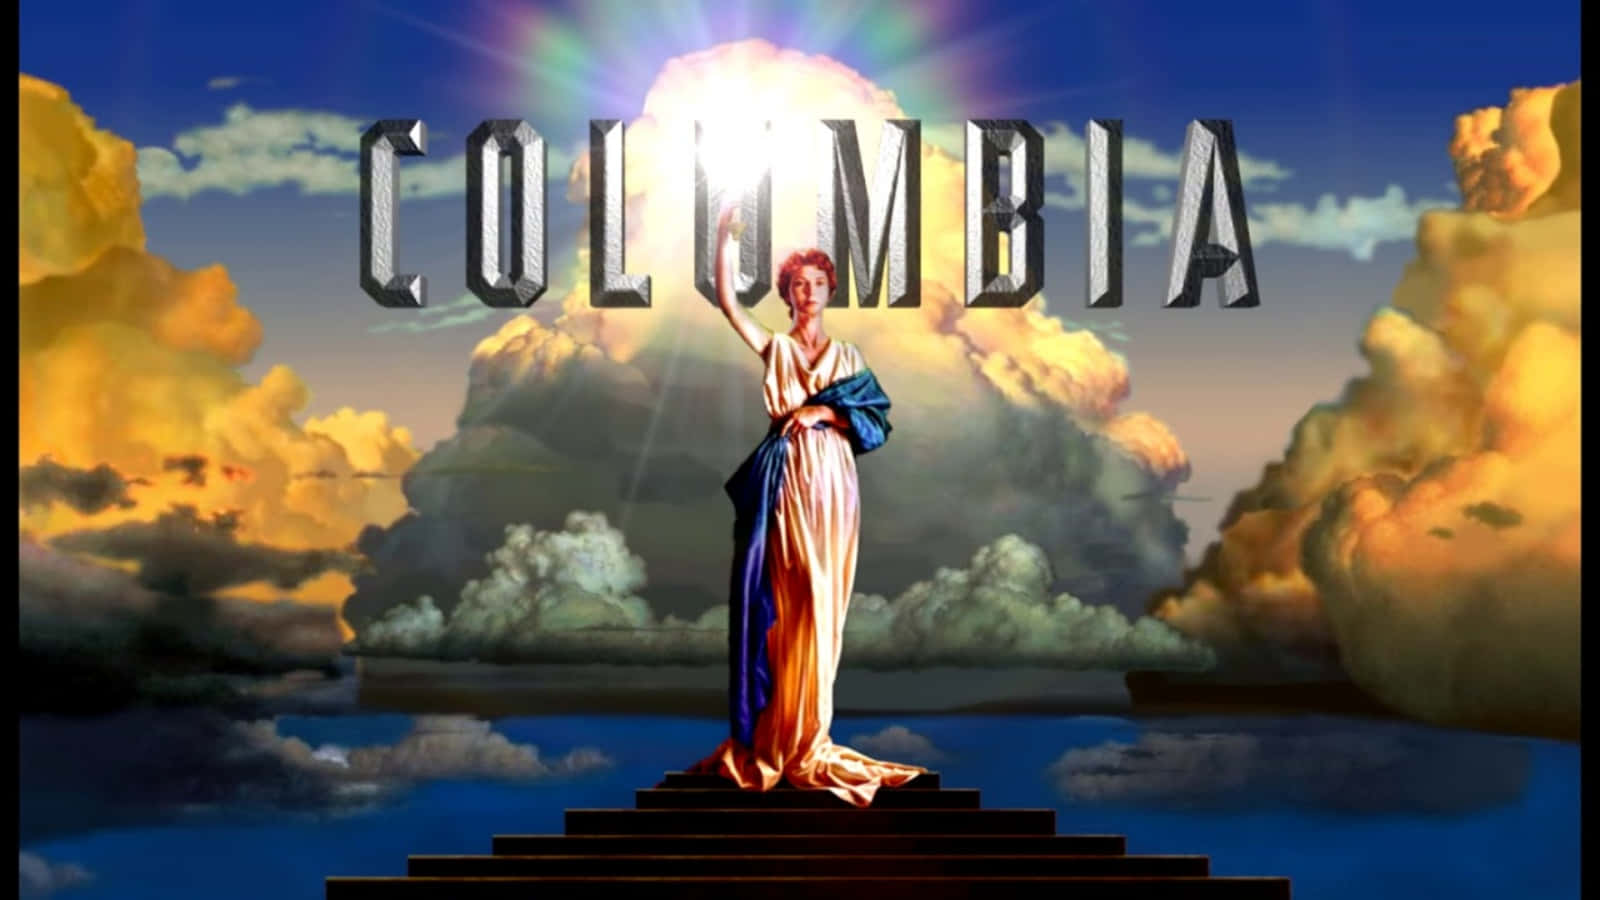 Columbiapictures Torch Lady Can Be Translated To Italian As 